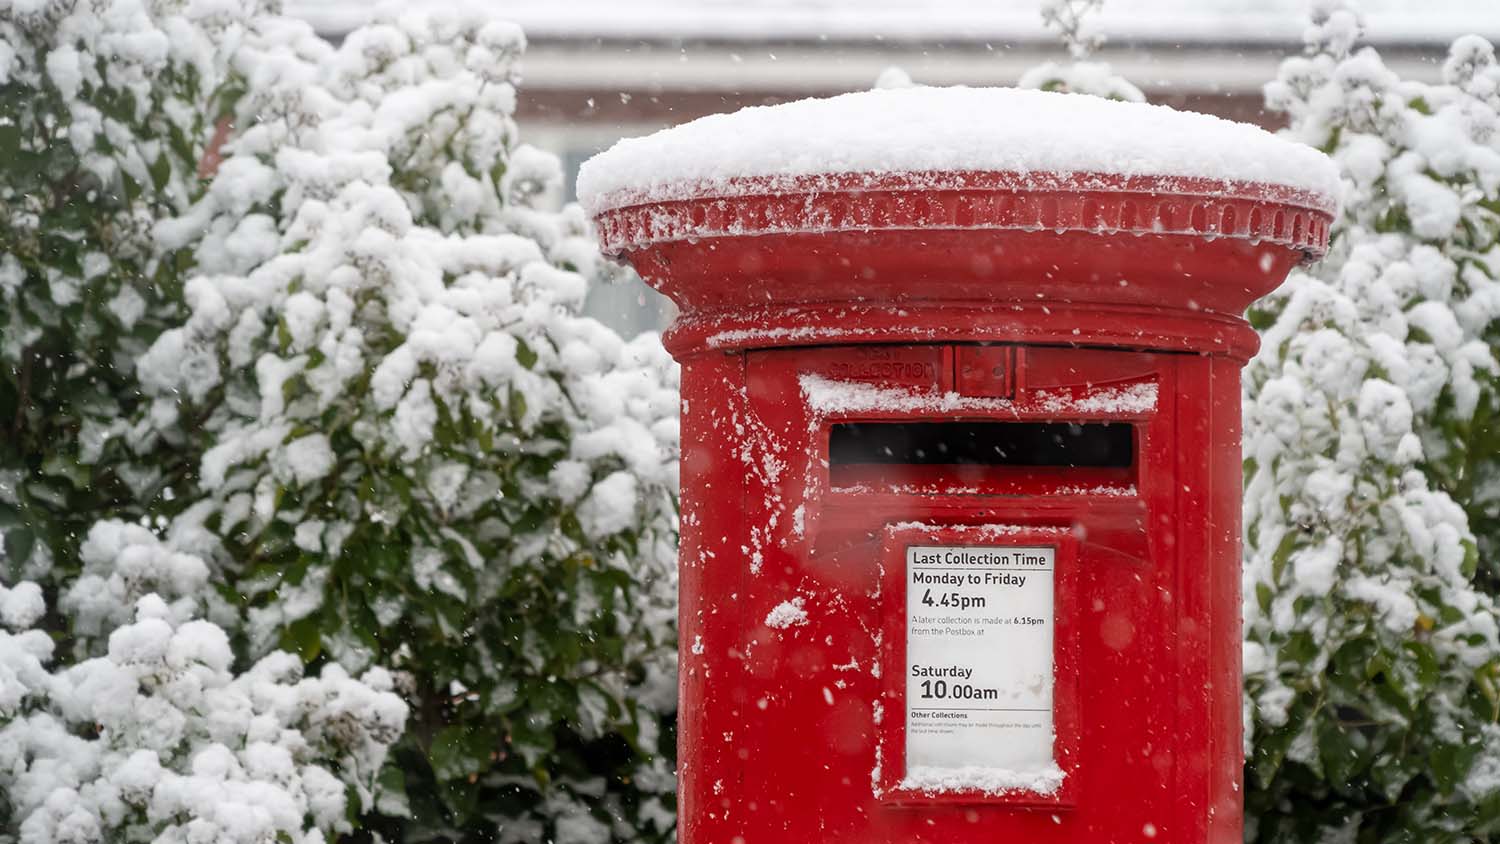 Post Box In The Snow